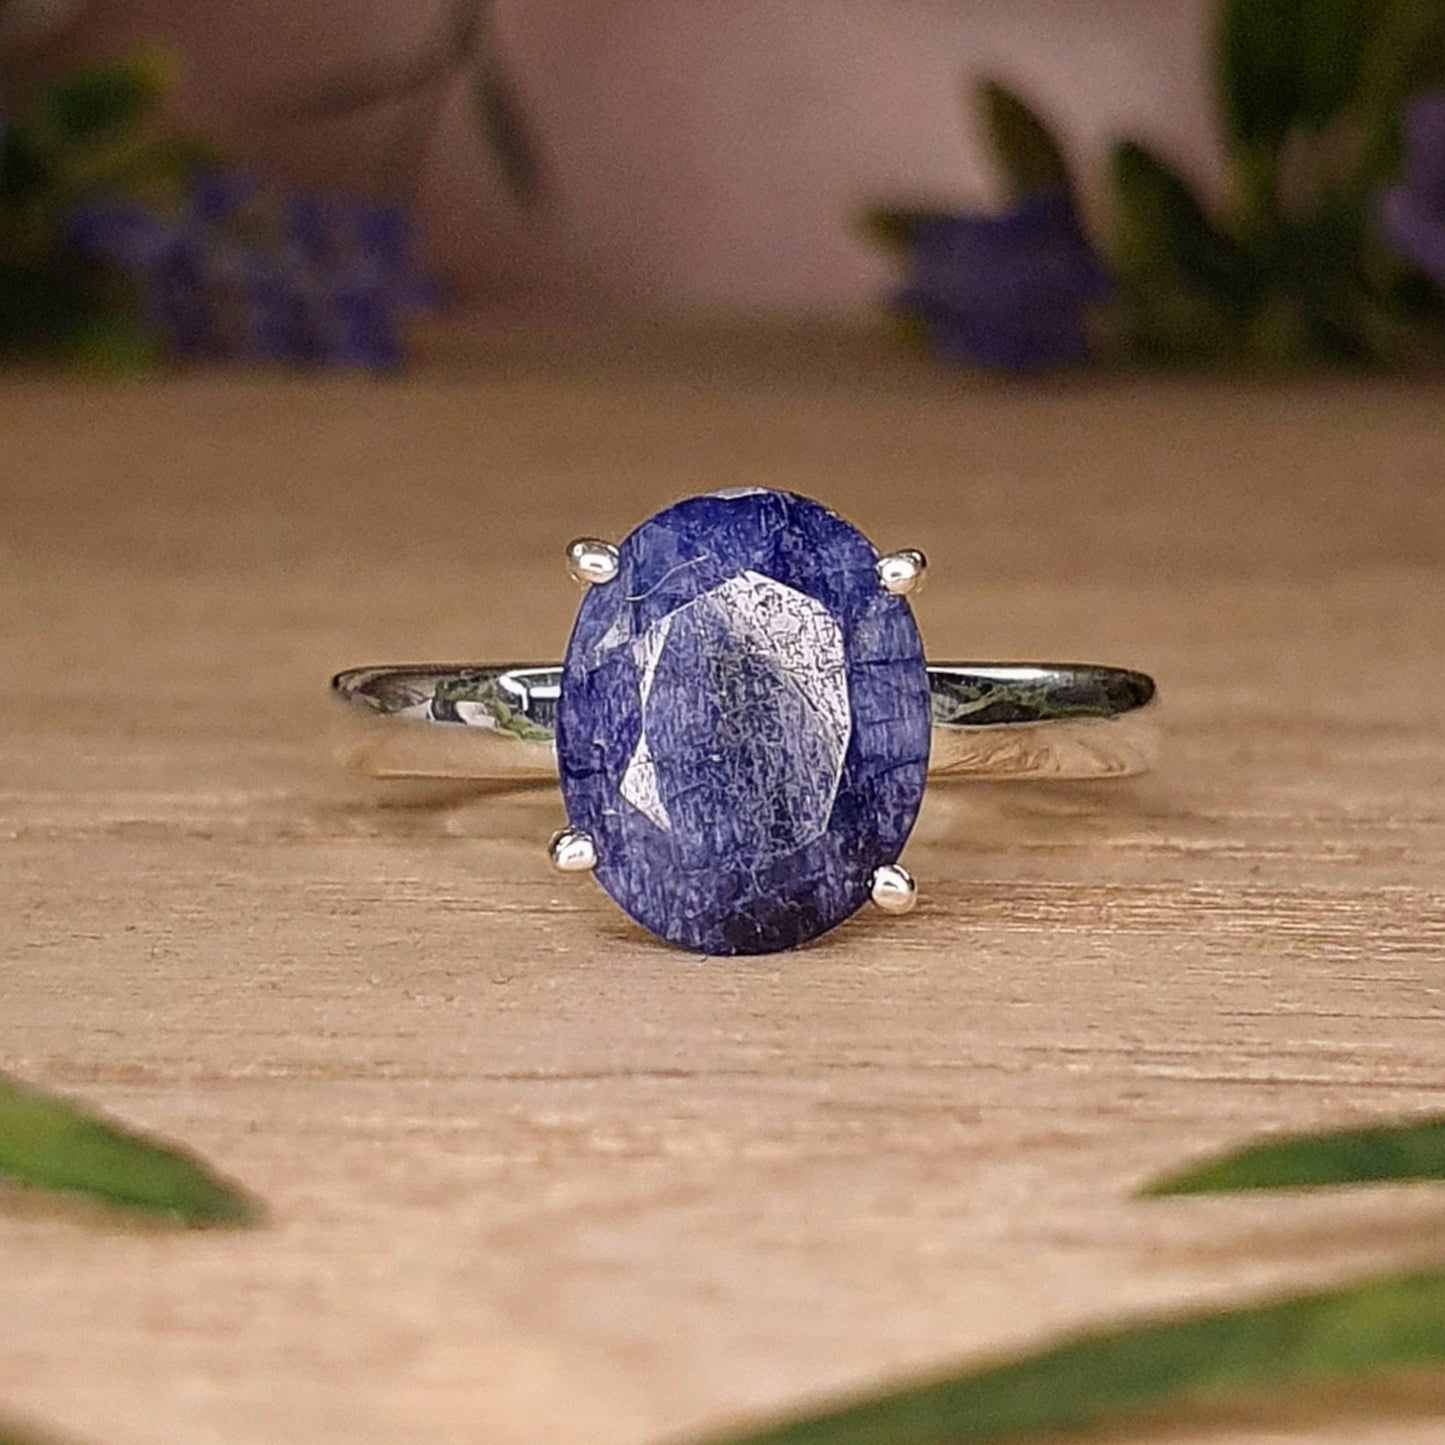 Sapphire Ring - Size 7.5 (ZX432)